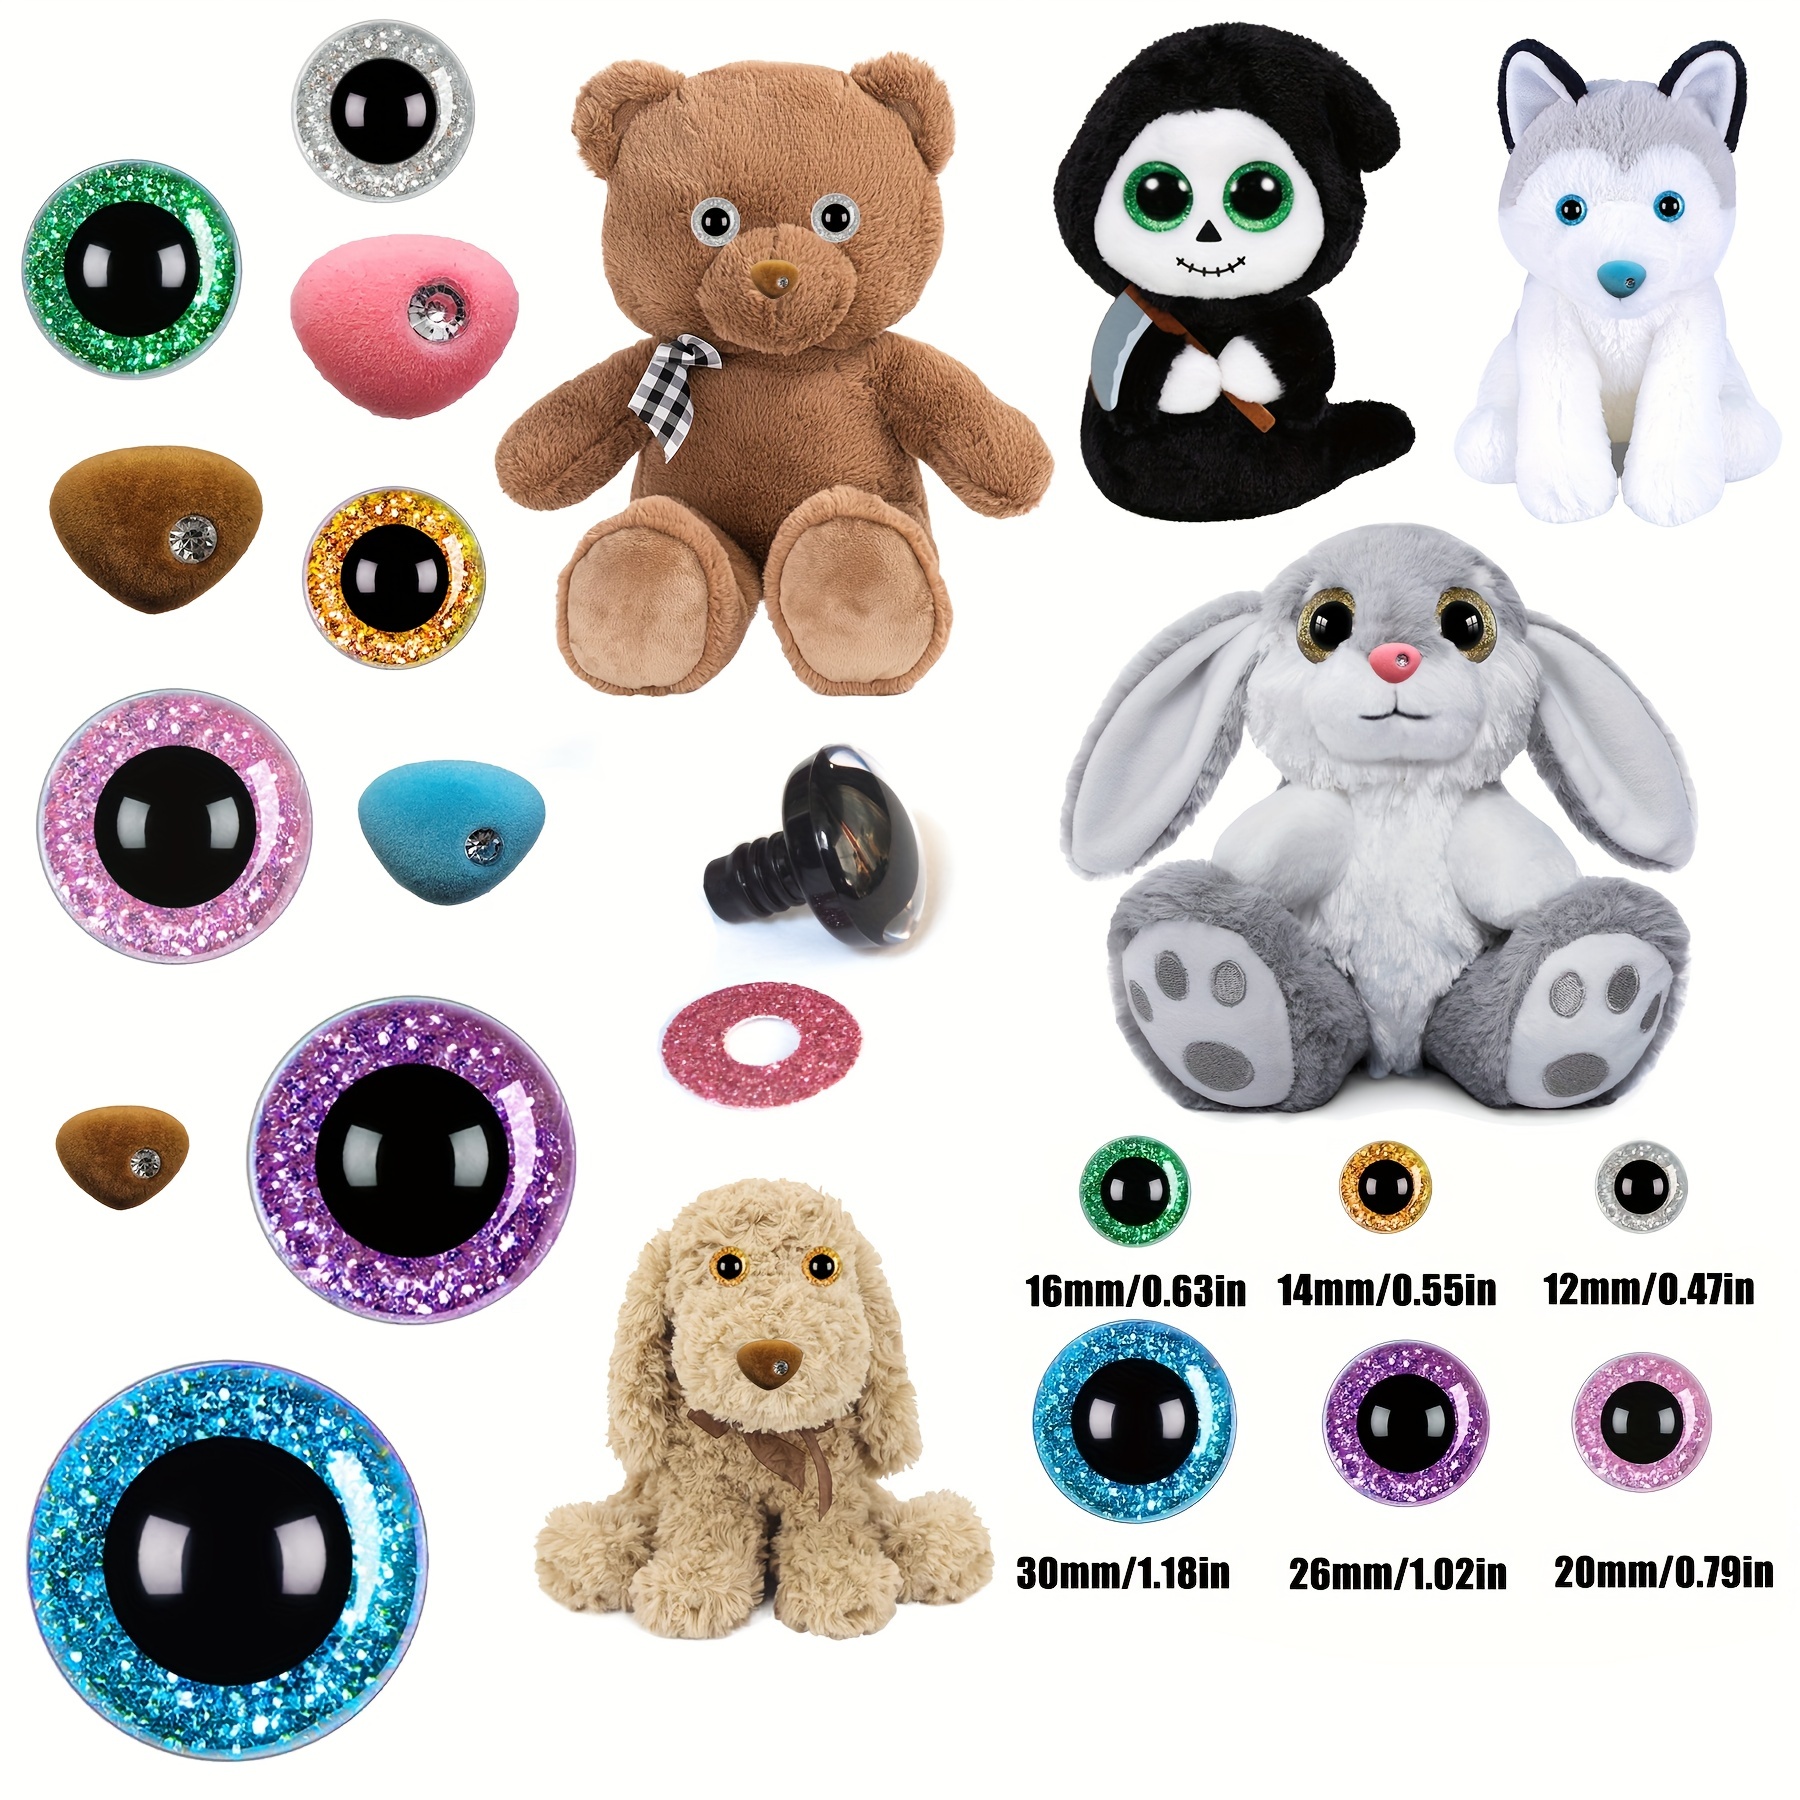 10 PAIR Eye Lids Choose Size 8mm to 27mm Snap on Back of Safety Eyes for  Teddy Bear Doll Crafts Plush Animals Fantasy Creatures EL-1 